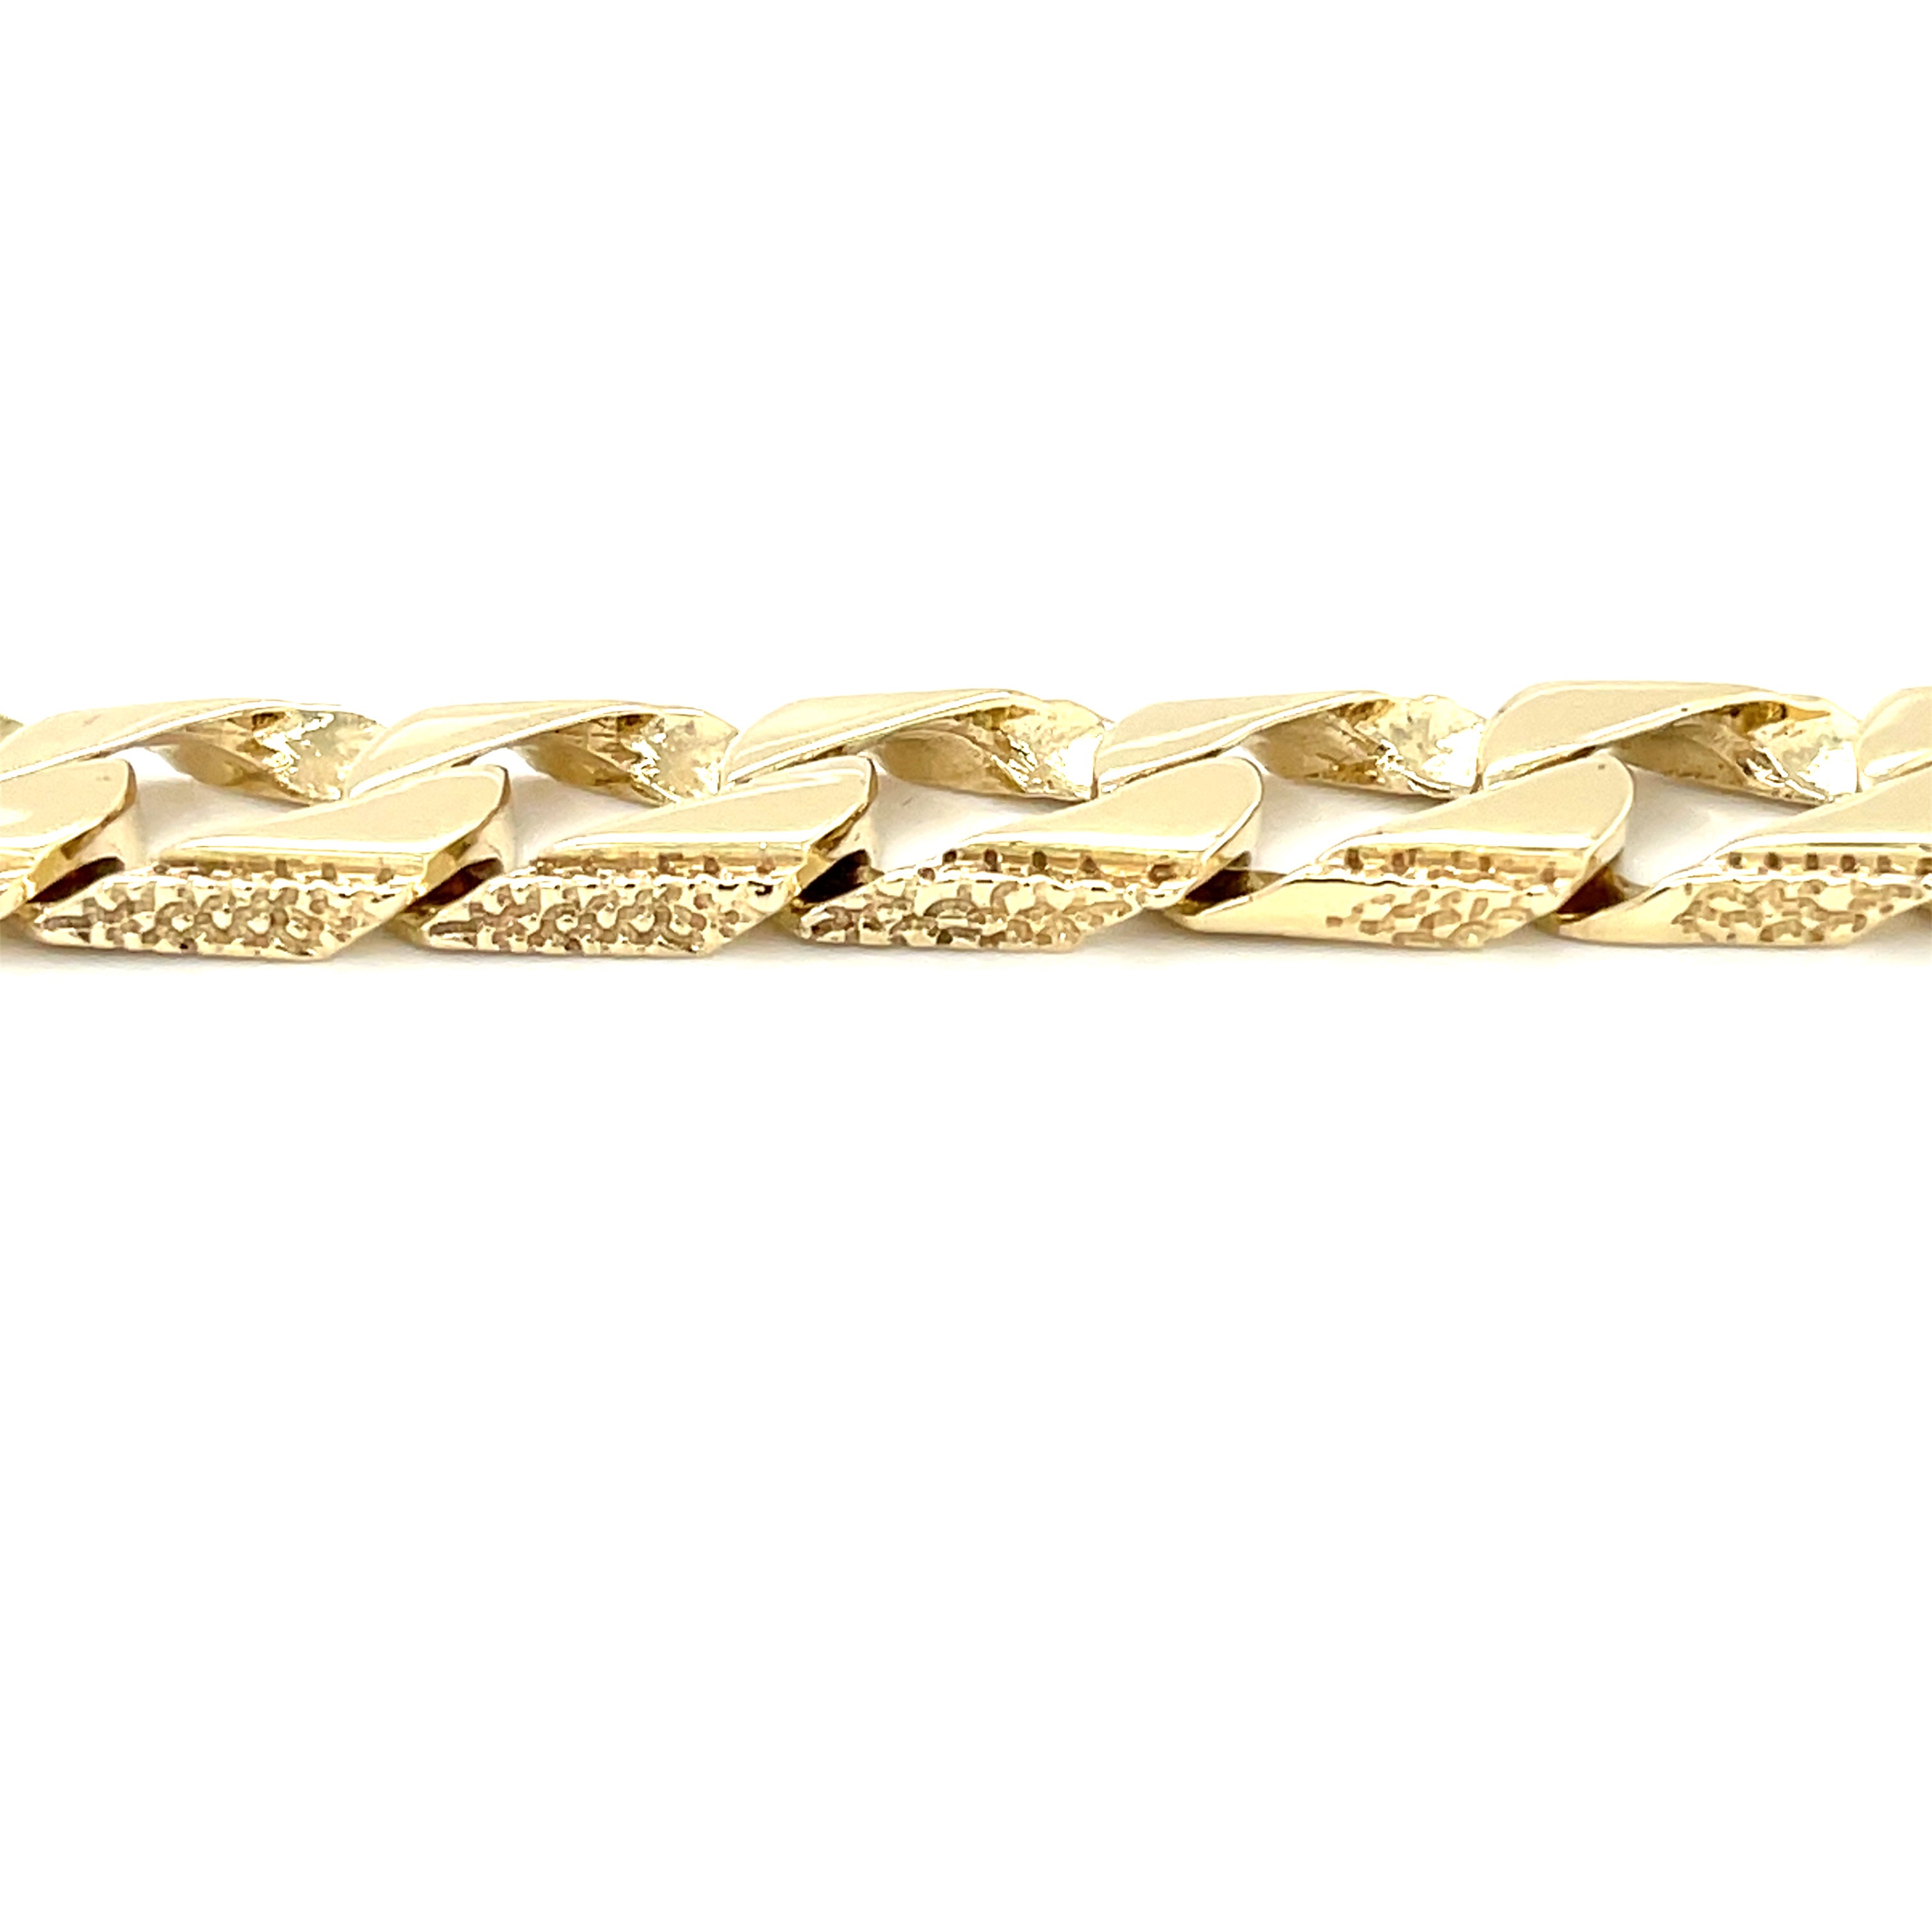 9ct Yellow Gold 8.5" Patterned & Polished Curb Link Bracelet 36.95g